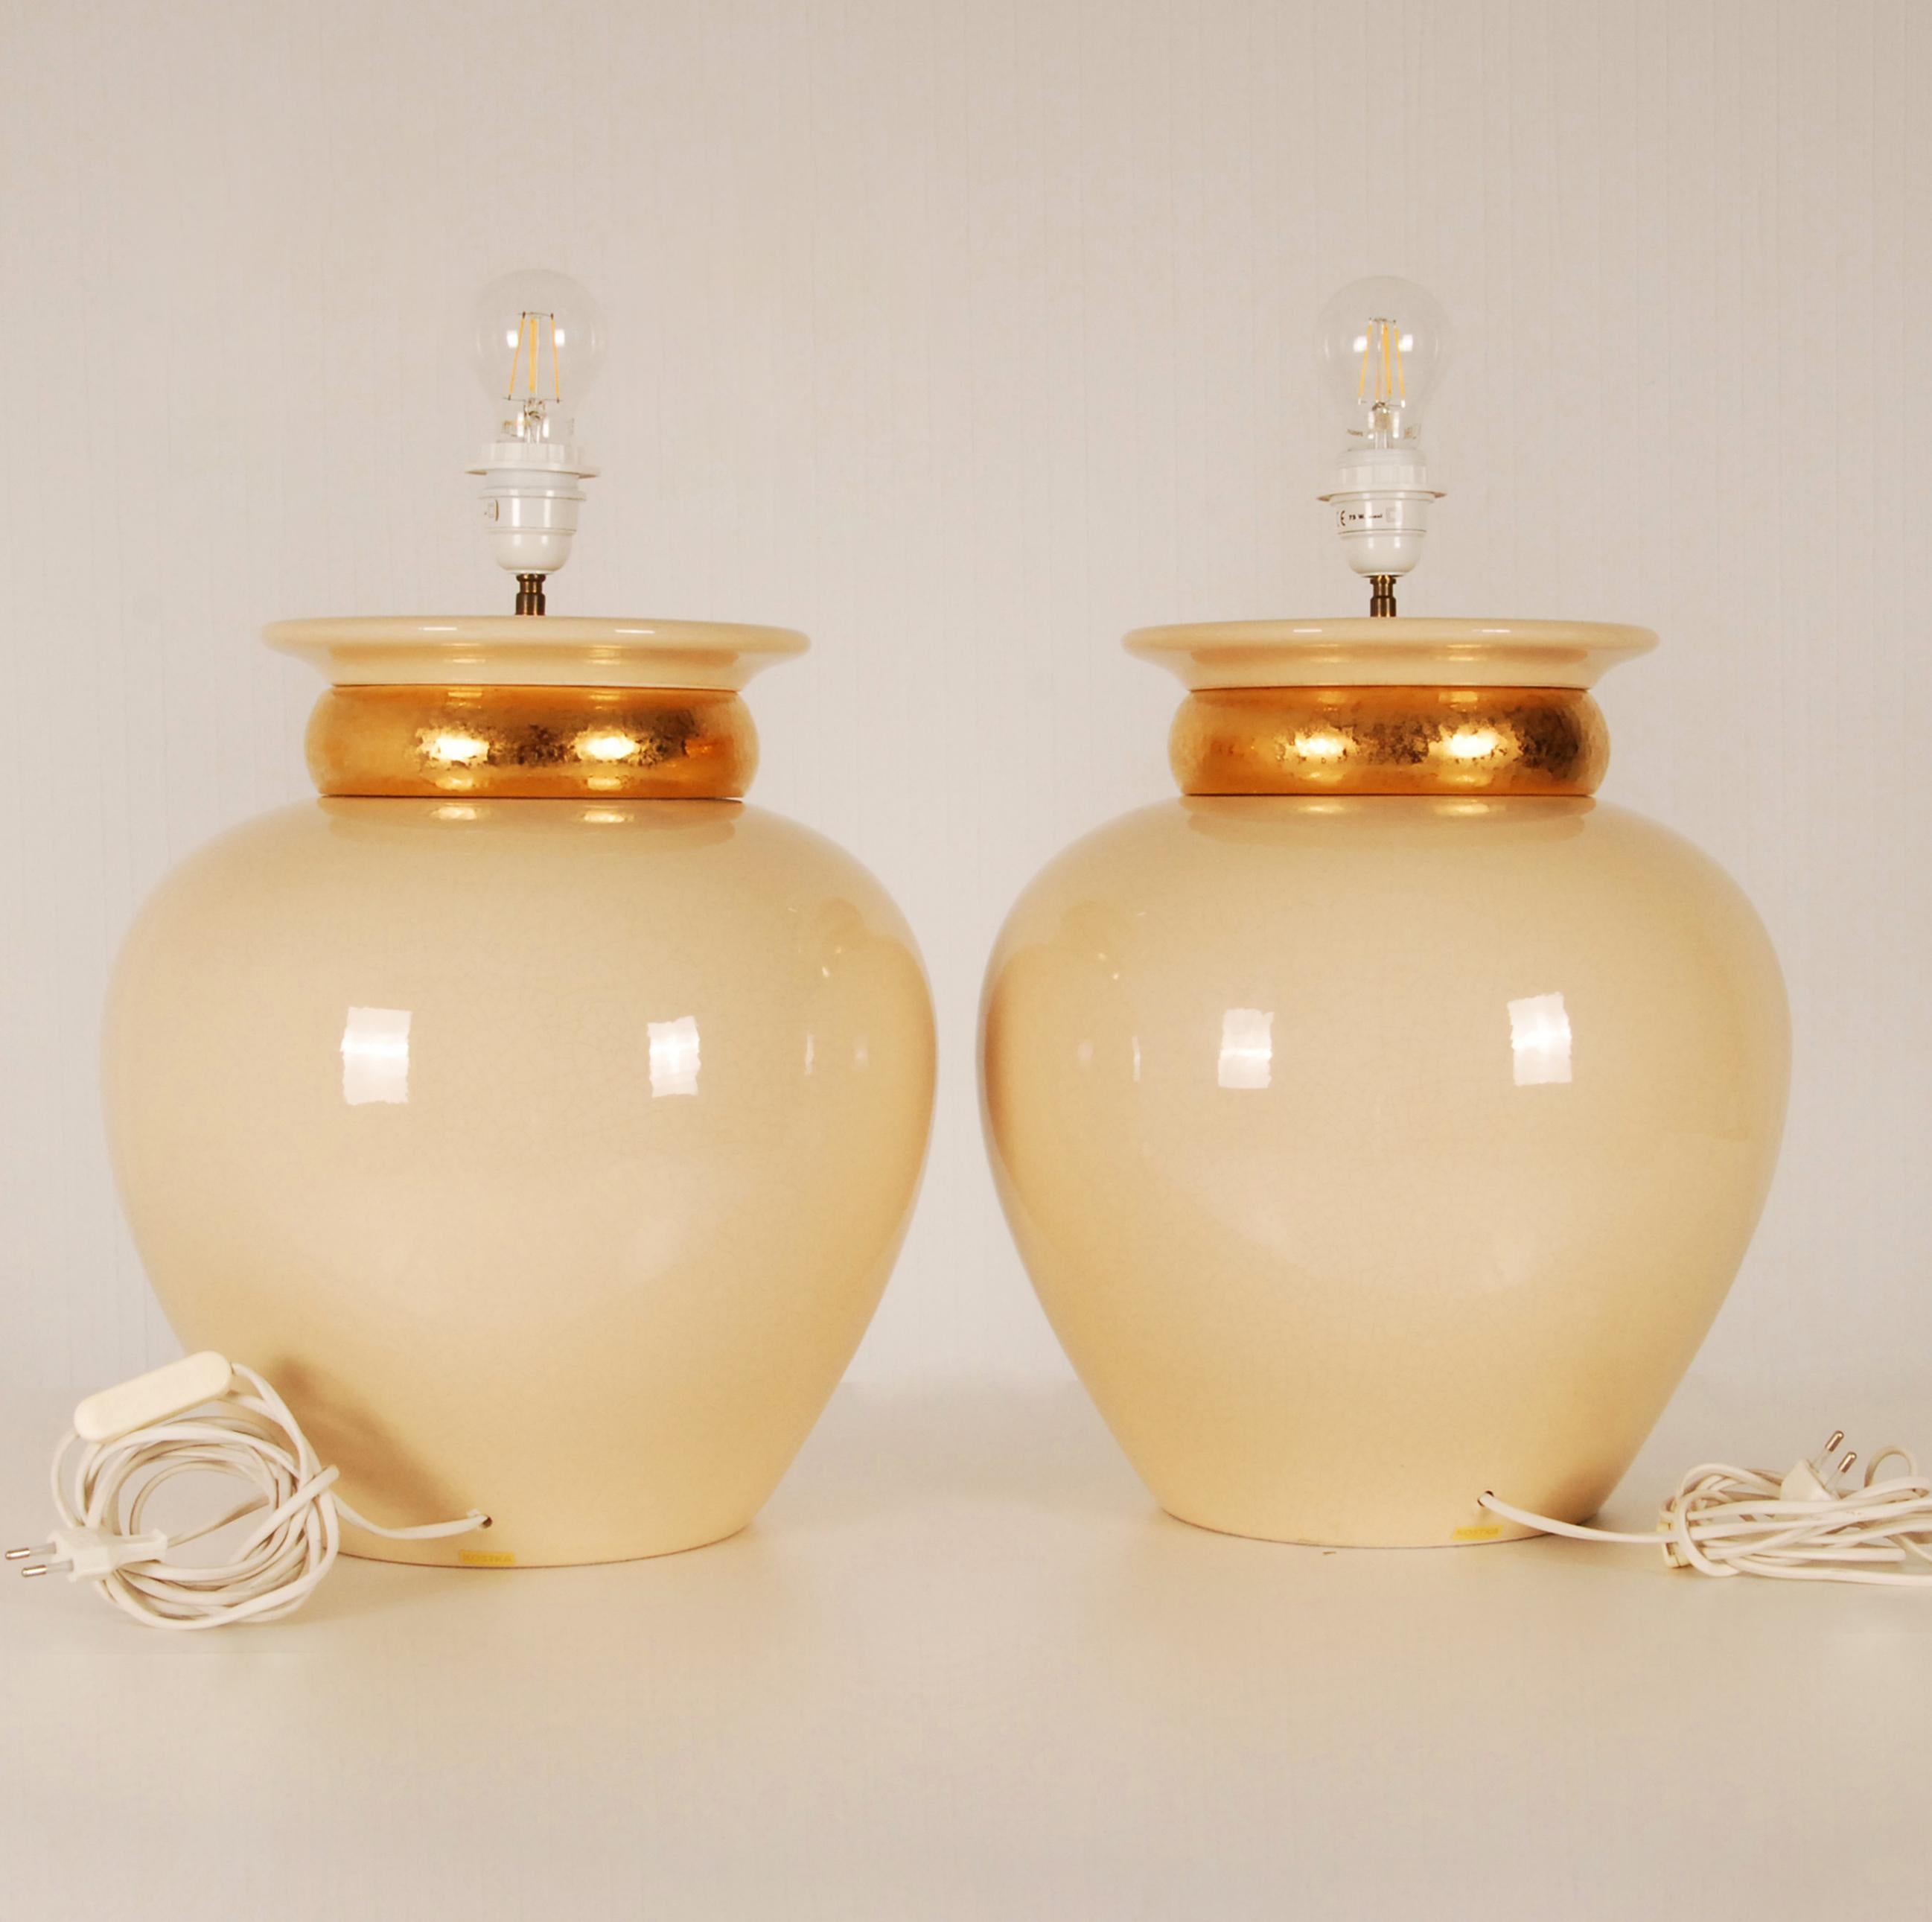 Vintage French Ceramic Robert Kostka Table Lamps Gold and Beige  - a Pair In Good Condition For Sale In Wommelgem, VAN